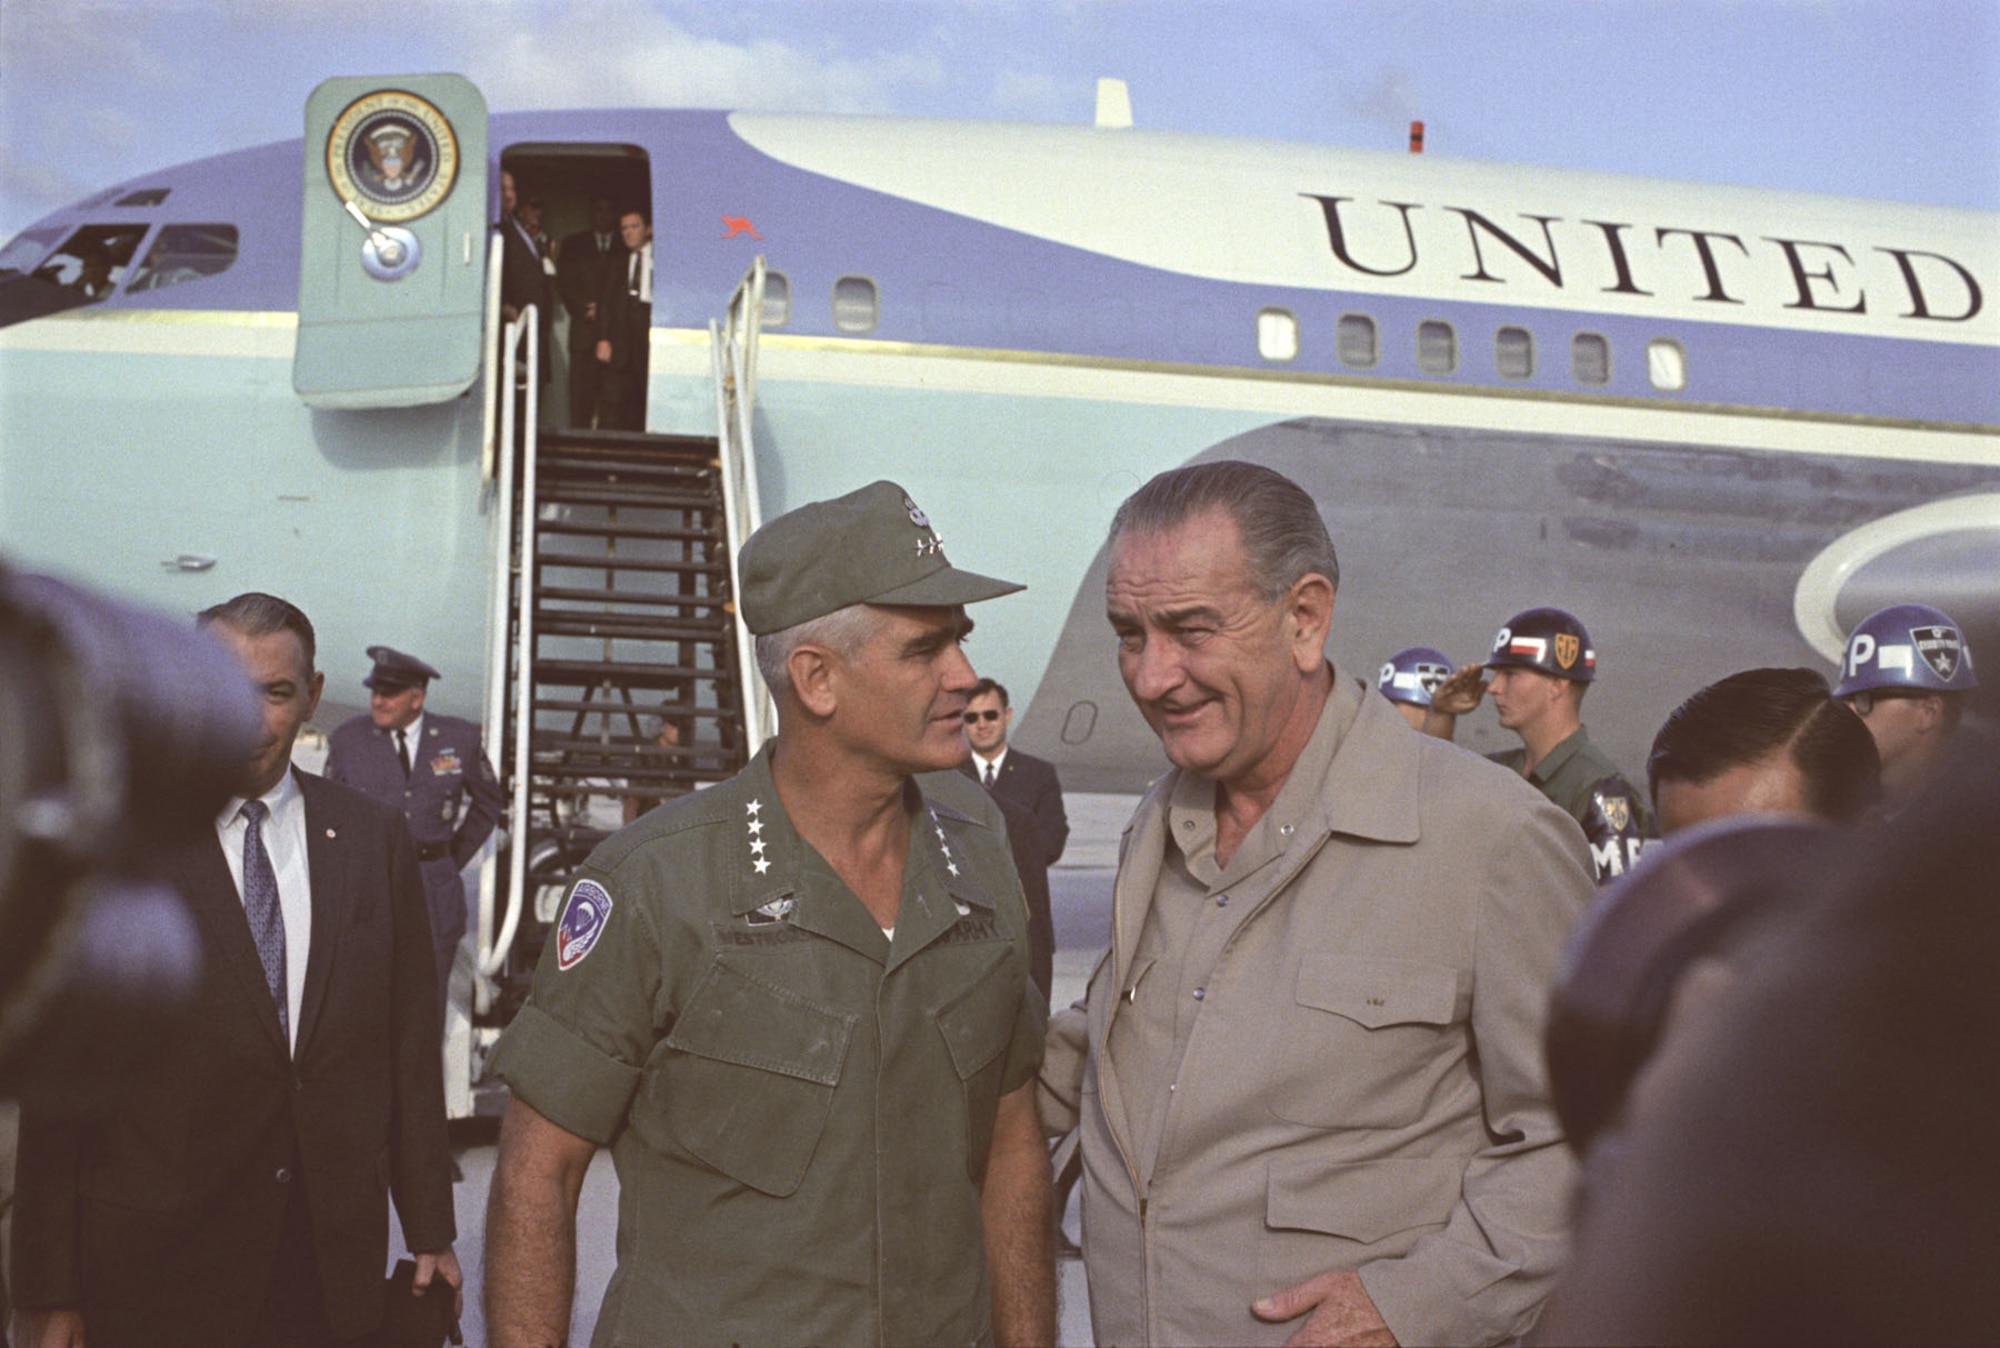 President Johnson visited Gen William C. Westmoreland, U.S. military commander, in South Vietnam a month before Tet. (U.S. Air Force photo)